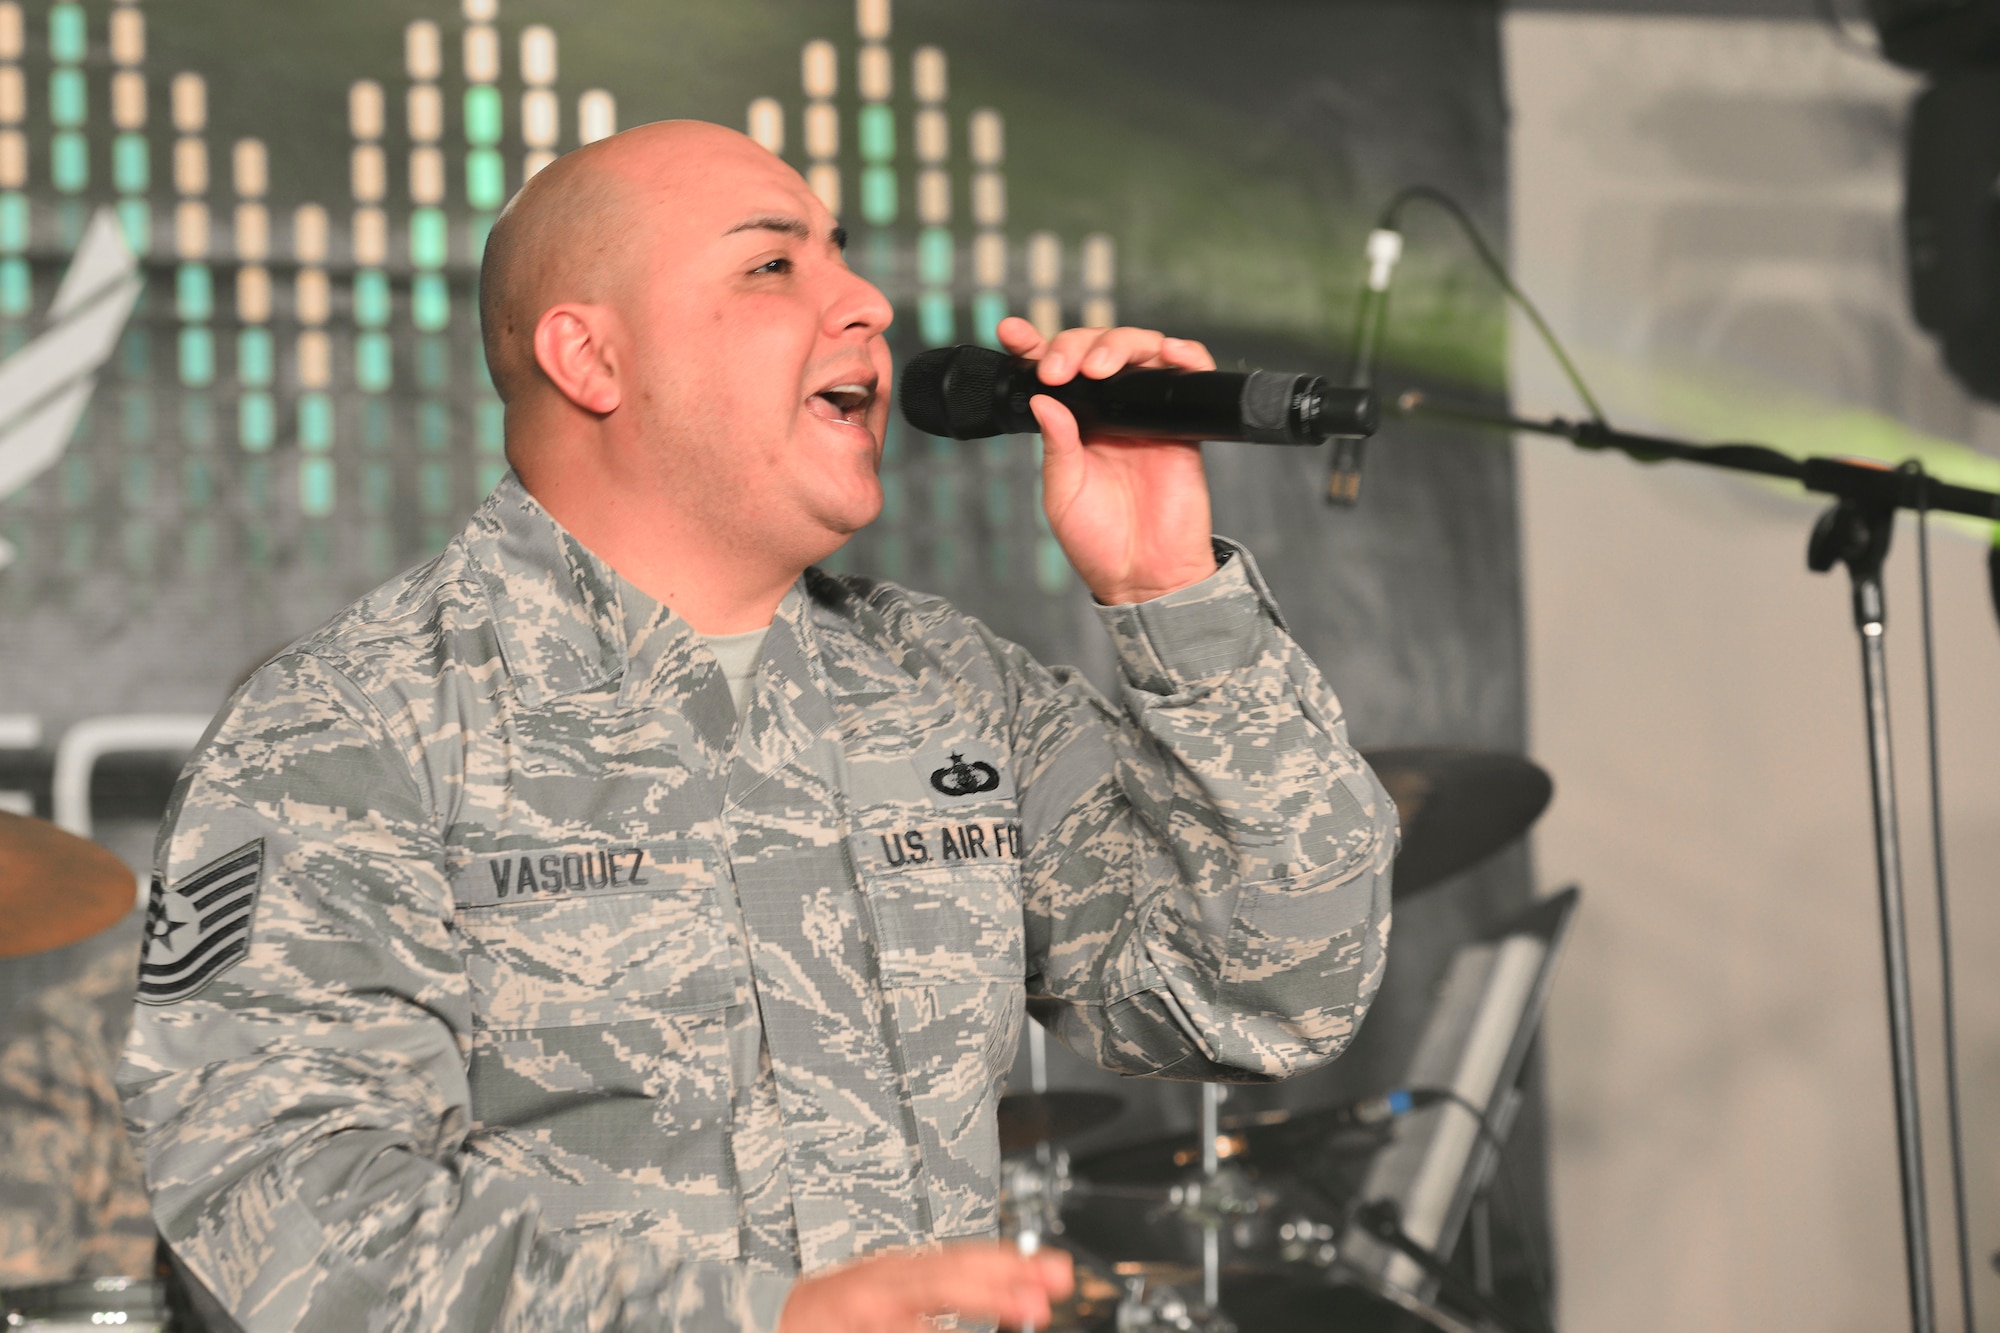 U.S. Air Force Tech. Sgt. Richard Vasquez, Full Spectrum noncommissioned officer in charge of auditions and vocals, sings during a rehearsal at Langley Air Force Base, Va., Jan. 20, 2016. The band recently deployed for 110 days to parts of the Middle East and Southwest Asia, performing in the regions’ schools and malls, as well as on radio and television shows. (U.S. Air Force photo by Tech. Sgt. Katie Gar Ward)